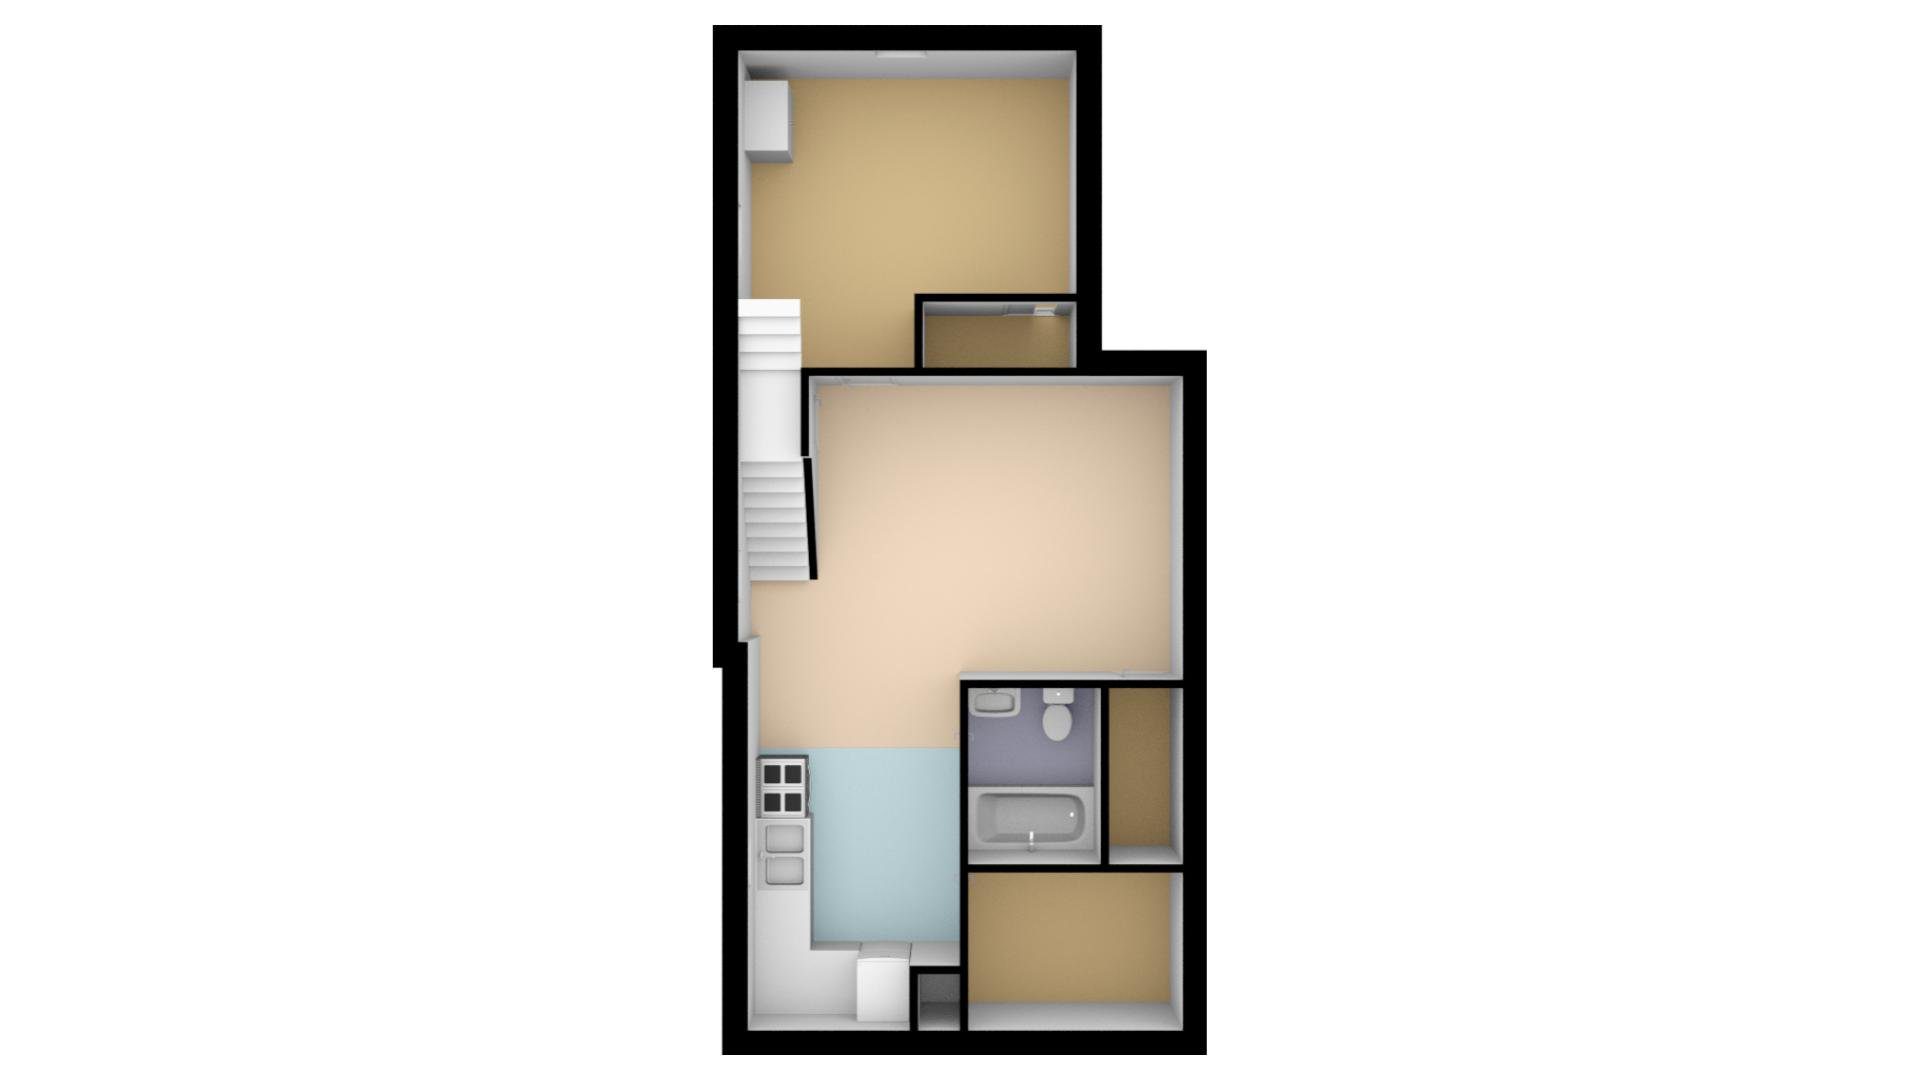 A floor plan of a room with a kitchen and bathroom.